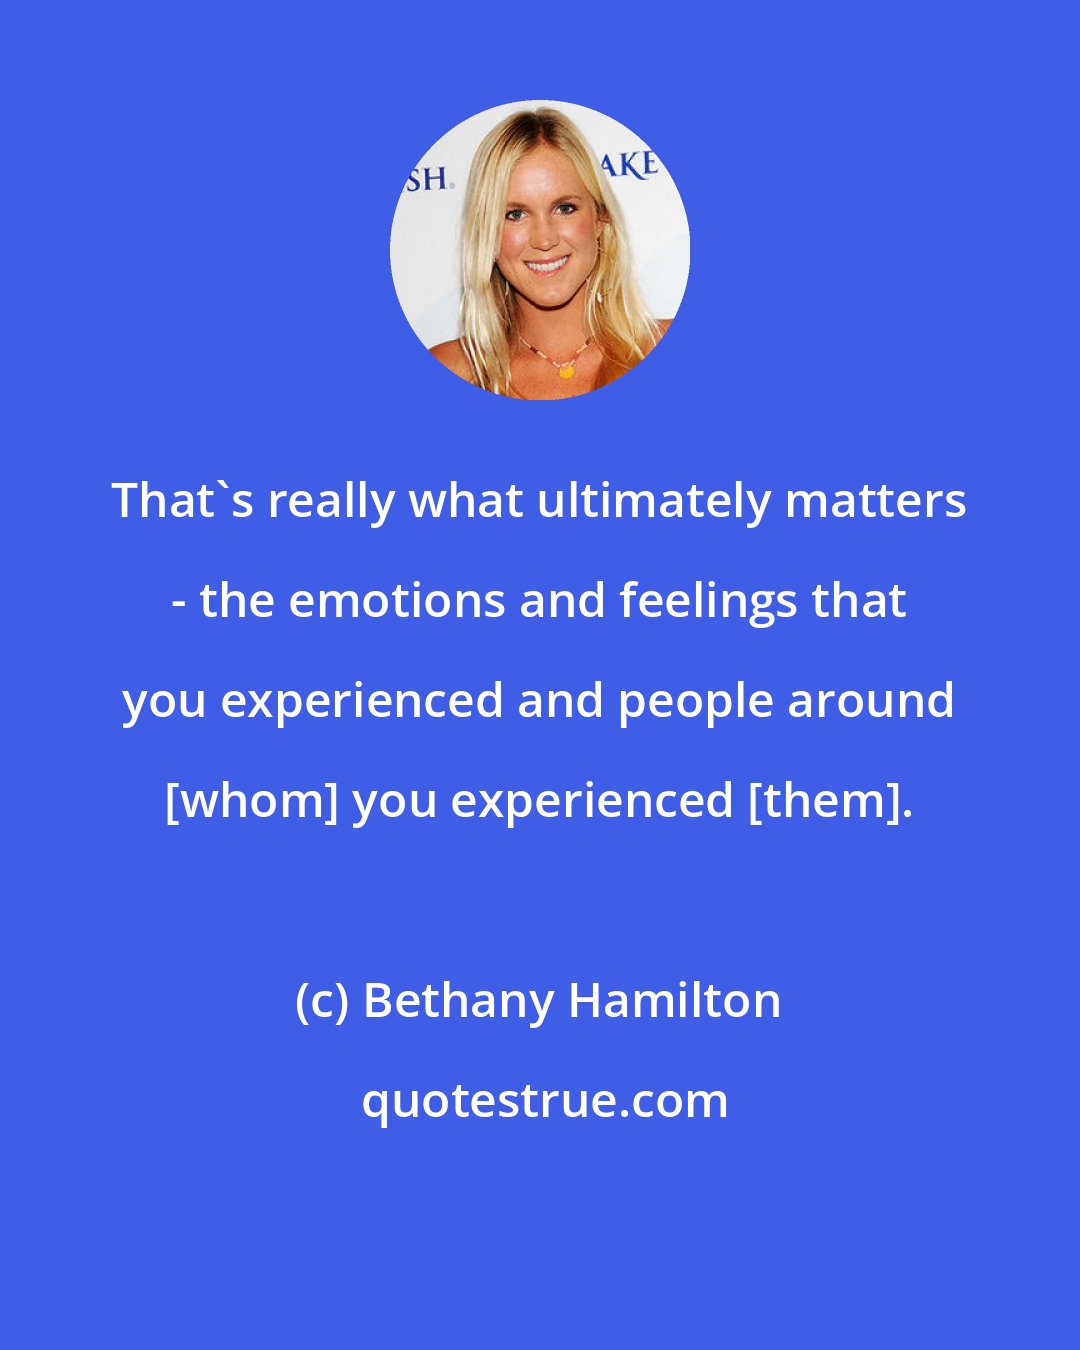 Bethany Hamilton: That's really what ultimately matters - the emotions and feelings that you experienced and people around [whom] you experienced [them].